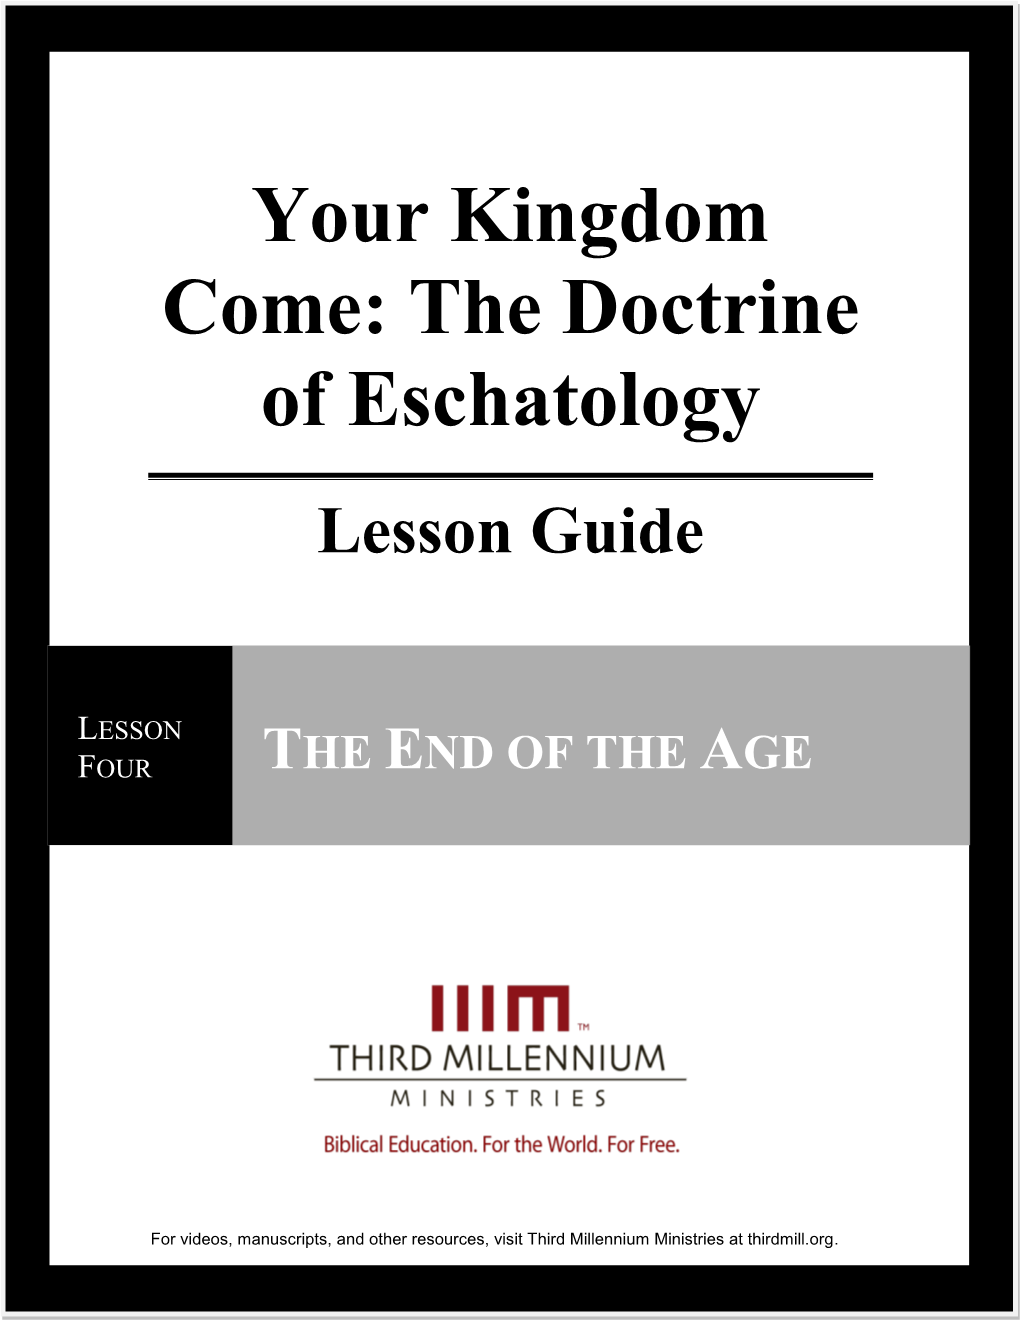 Your Kingdom Come: the Doctrine of Eschatology Lesson Guide